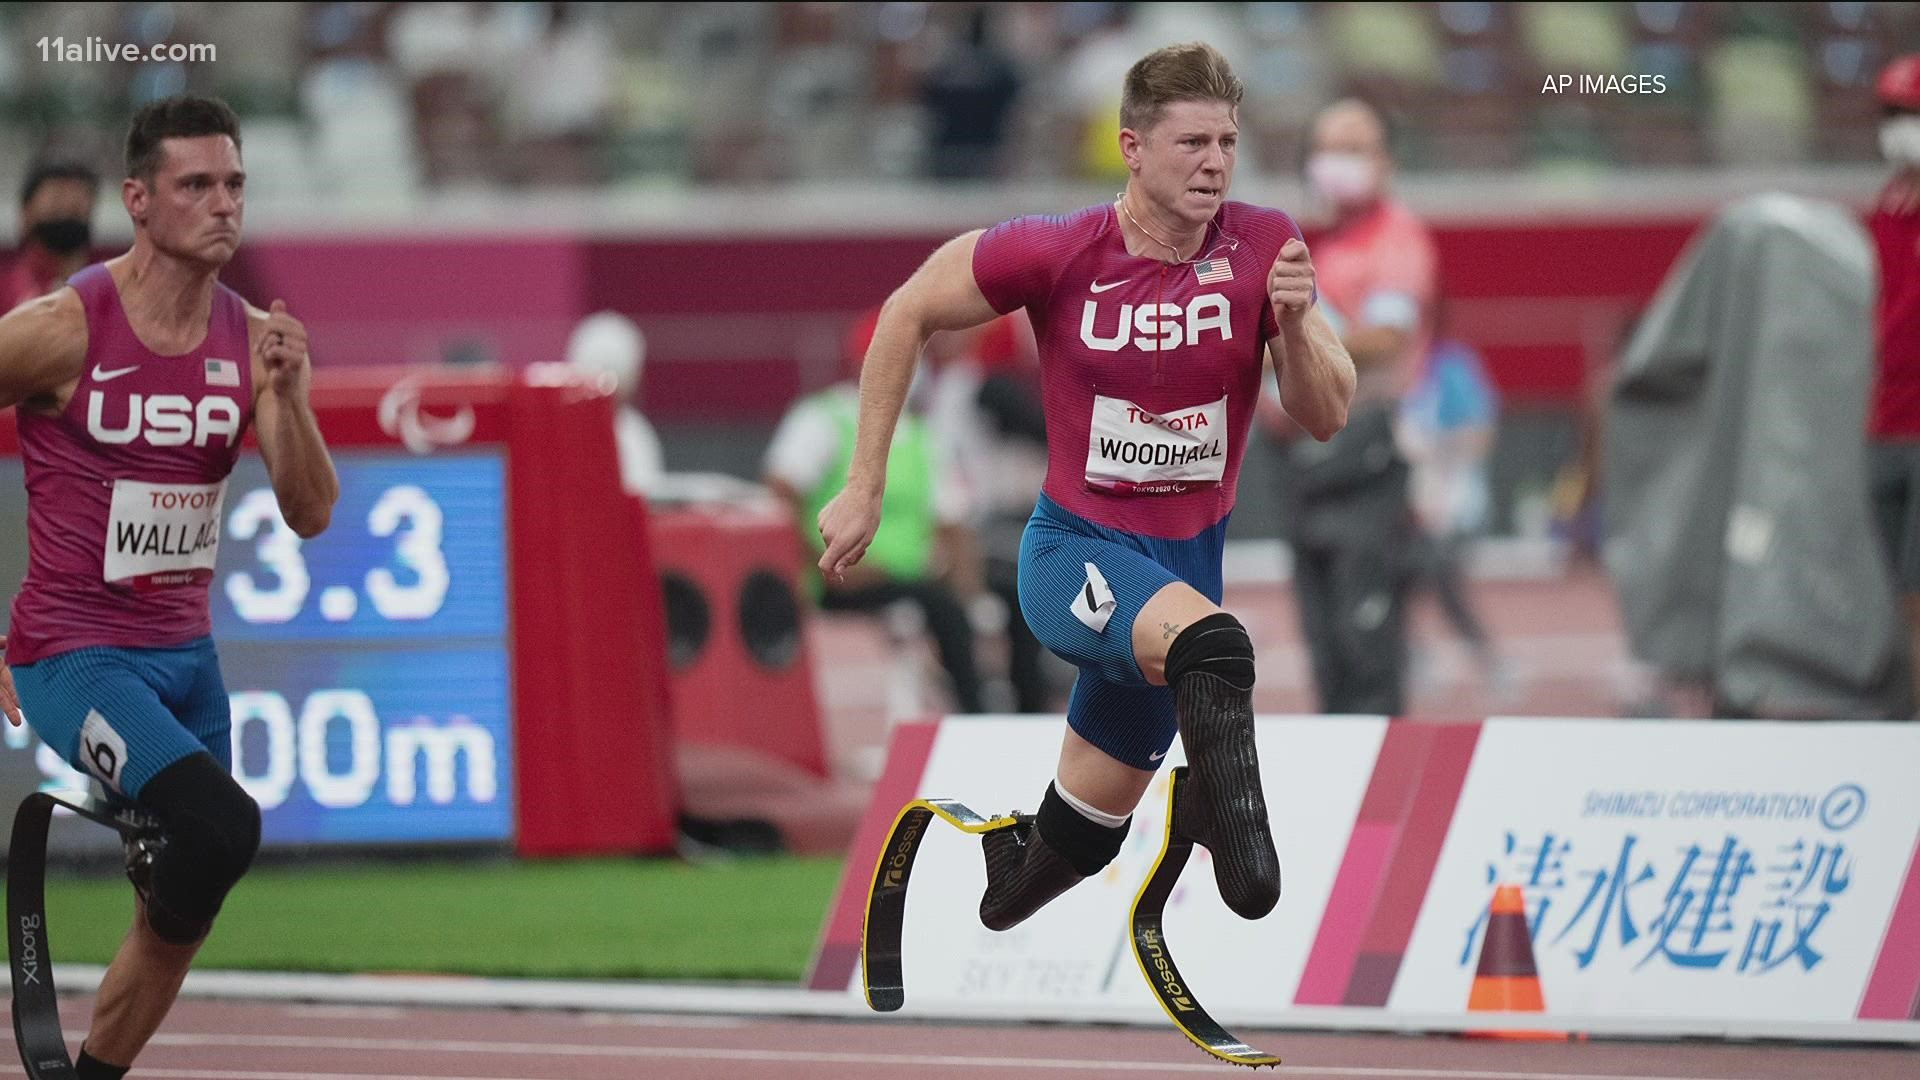 Hunter Woodhall won the bronze medal Friday in the 400m at the Paralympics.